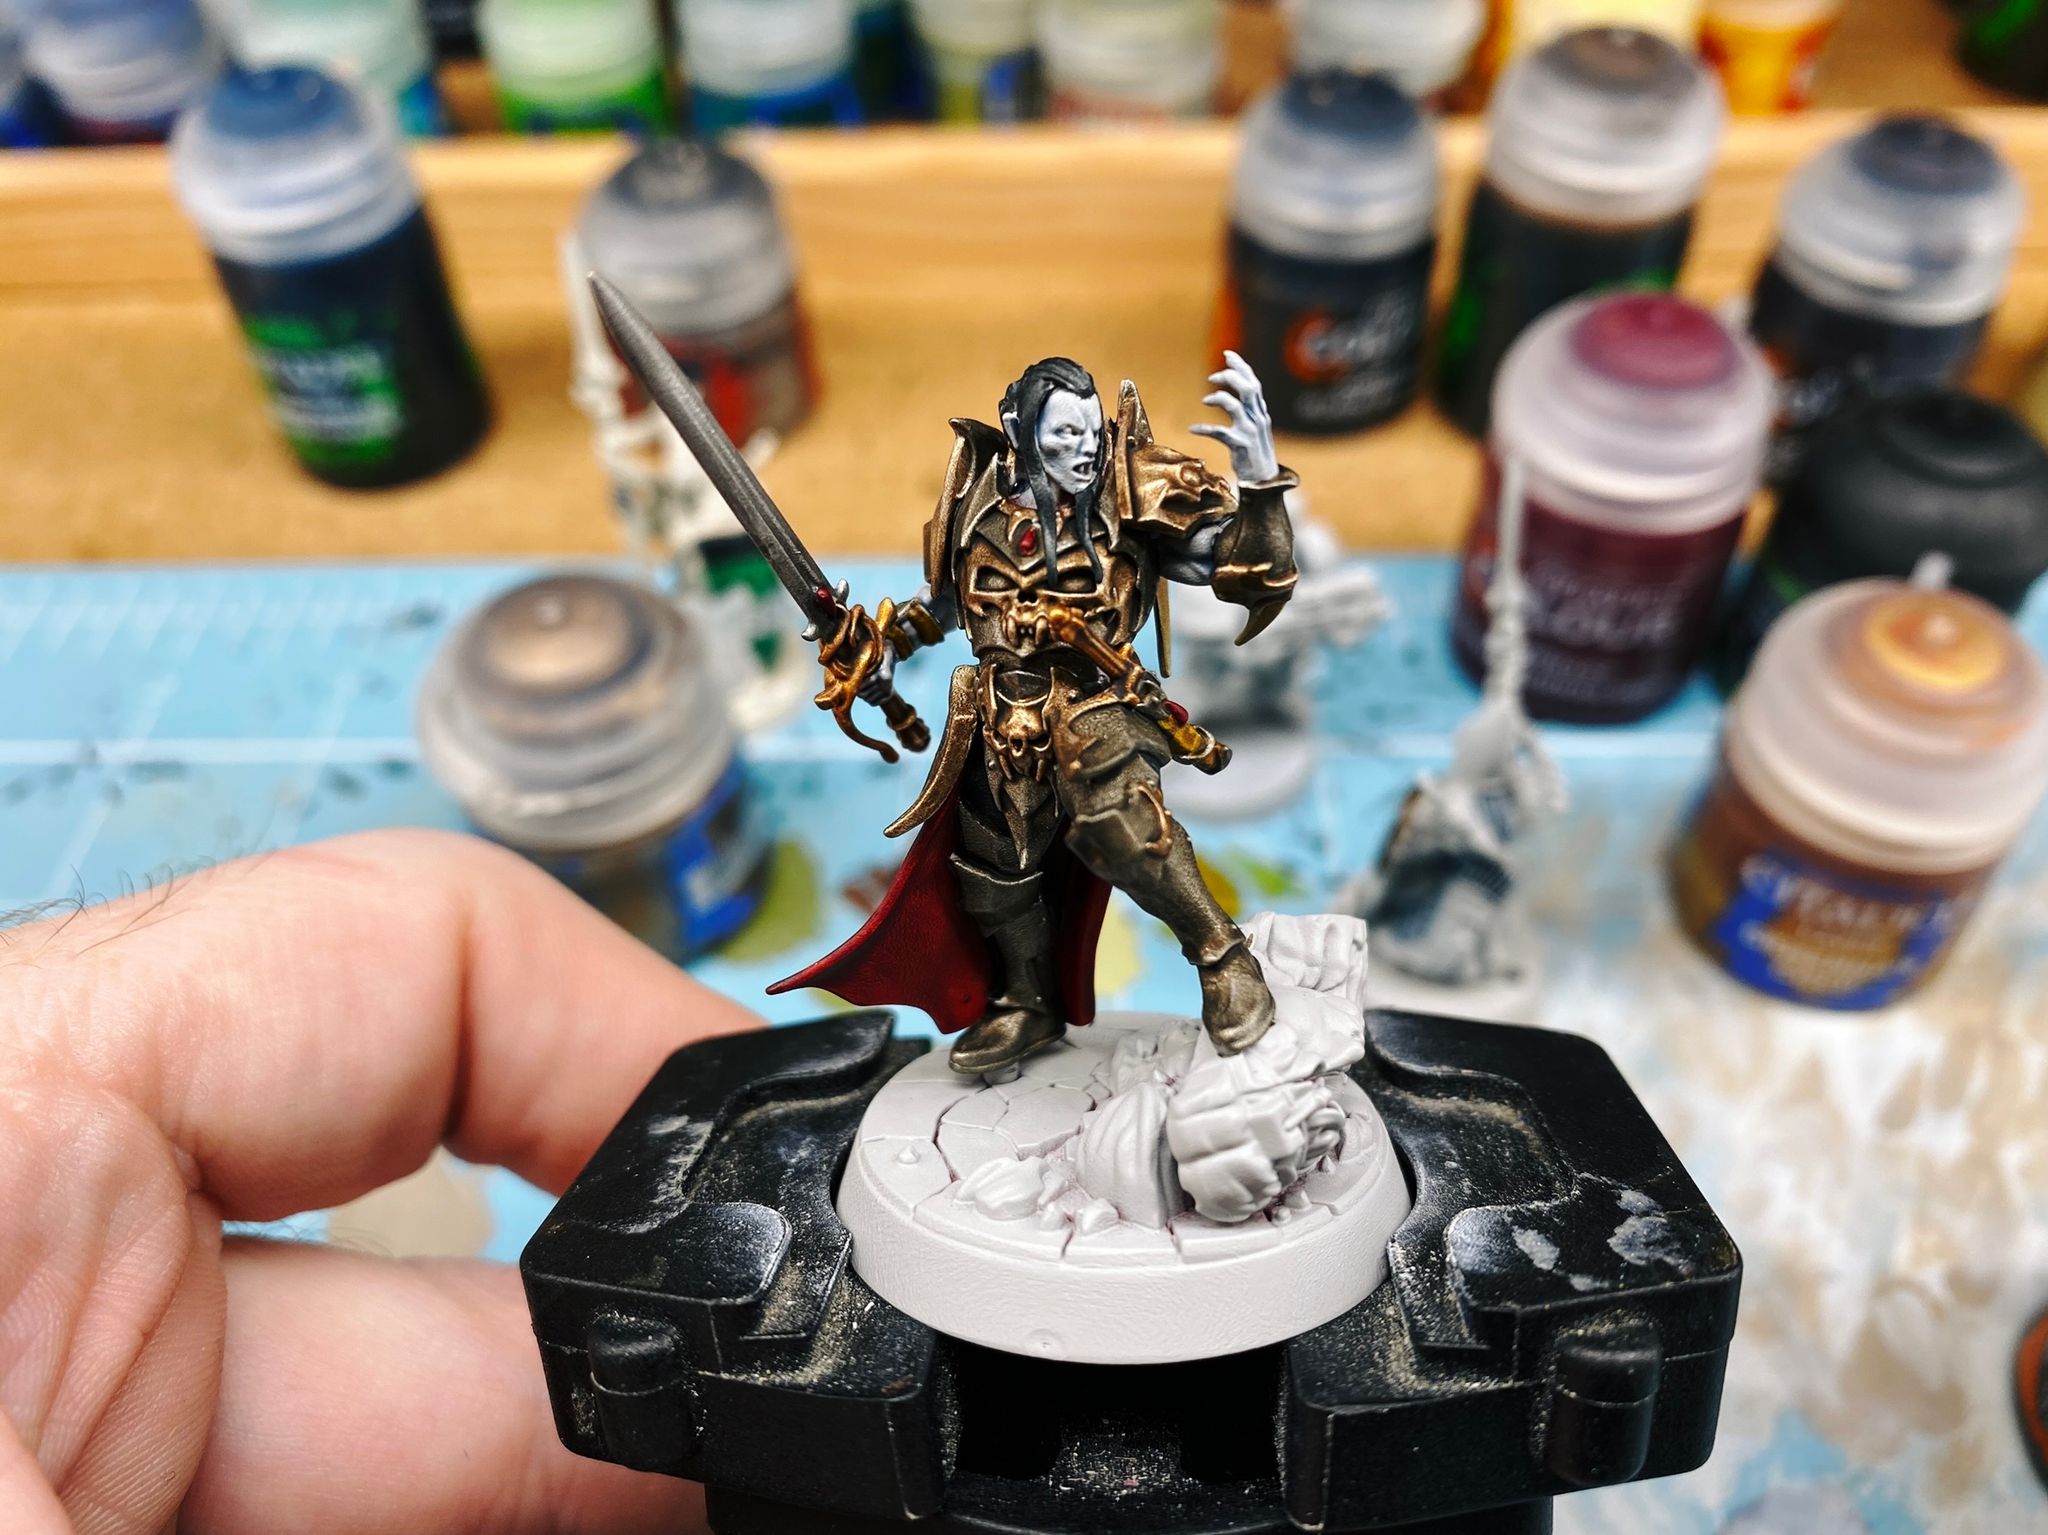 A photo of a vampire miniature, Prince Duvalle. His skin is very pale blue like he's dead (which is he, because he's a vampire), he's wearing steel- and brass-coloured armour with a blood red cloak, he has a sword in one hand, and his other hand is held up in front of him in a sort of "We will crush them" pose. His front foot is resting on top of the broken-off head of a stone statue.